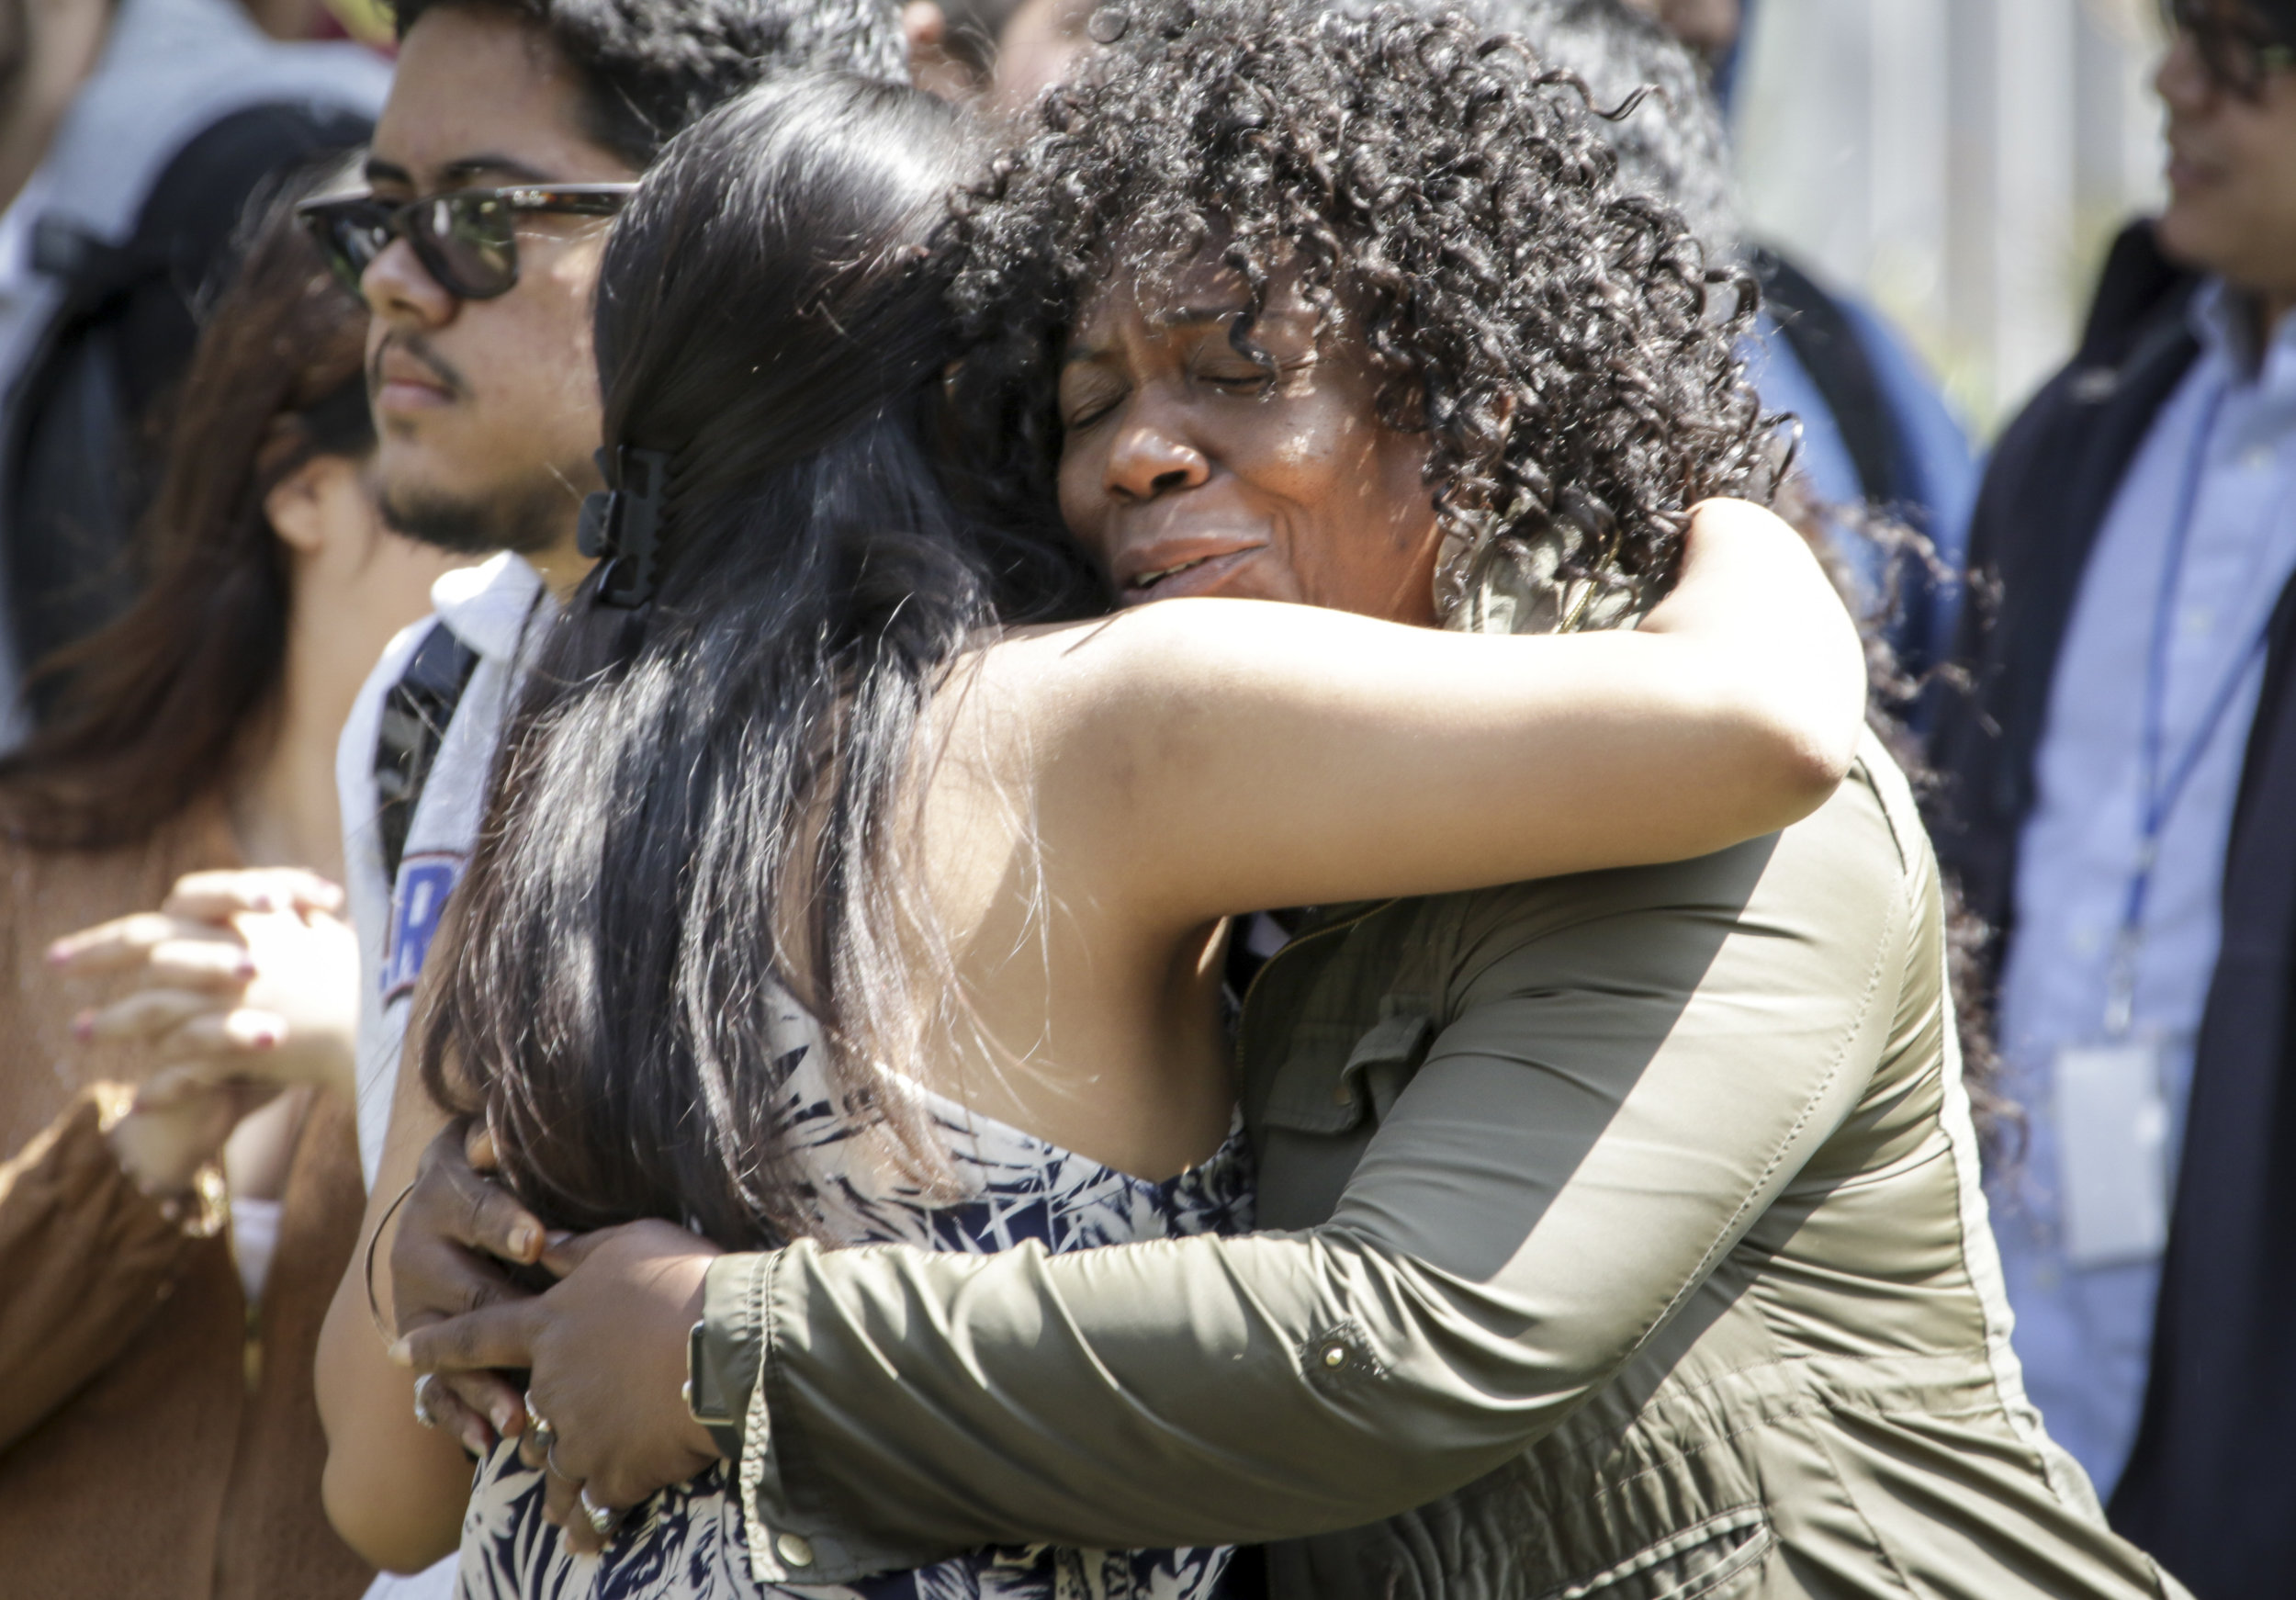  Santa Monica College student Hyacinth Mcleod (Right) hugs A.S. candidate Kimberly Hernandez (Left) while she attends the Associated Students elections debate held at the quad of the main campus on Tuesday, April 3, 2018. Kimberly is running for Dire